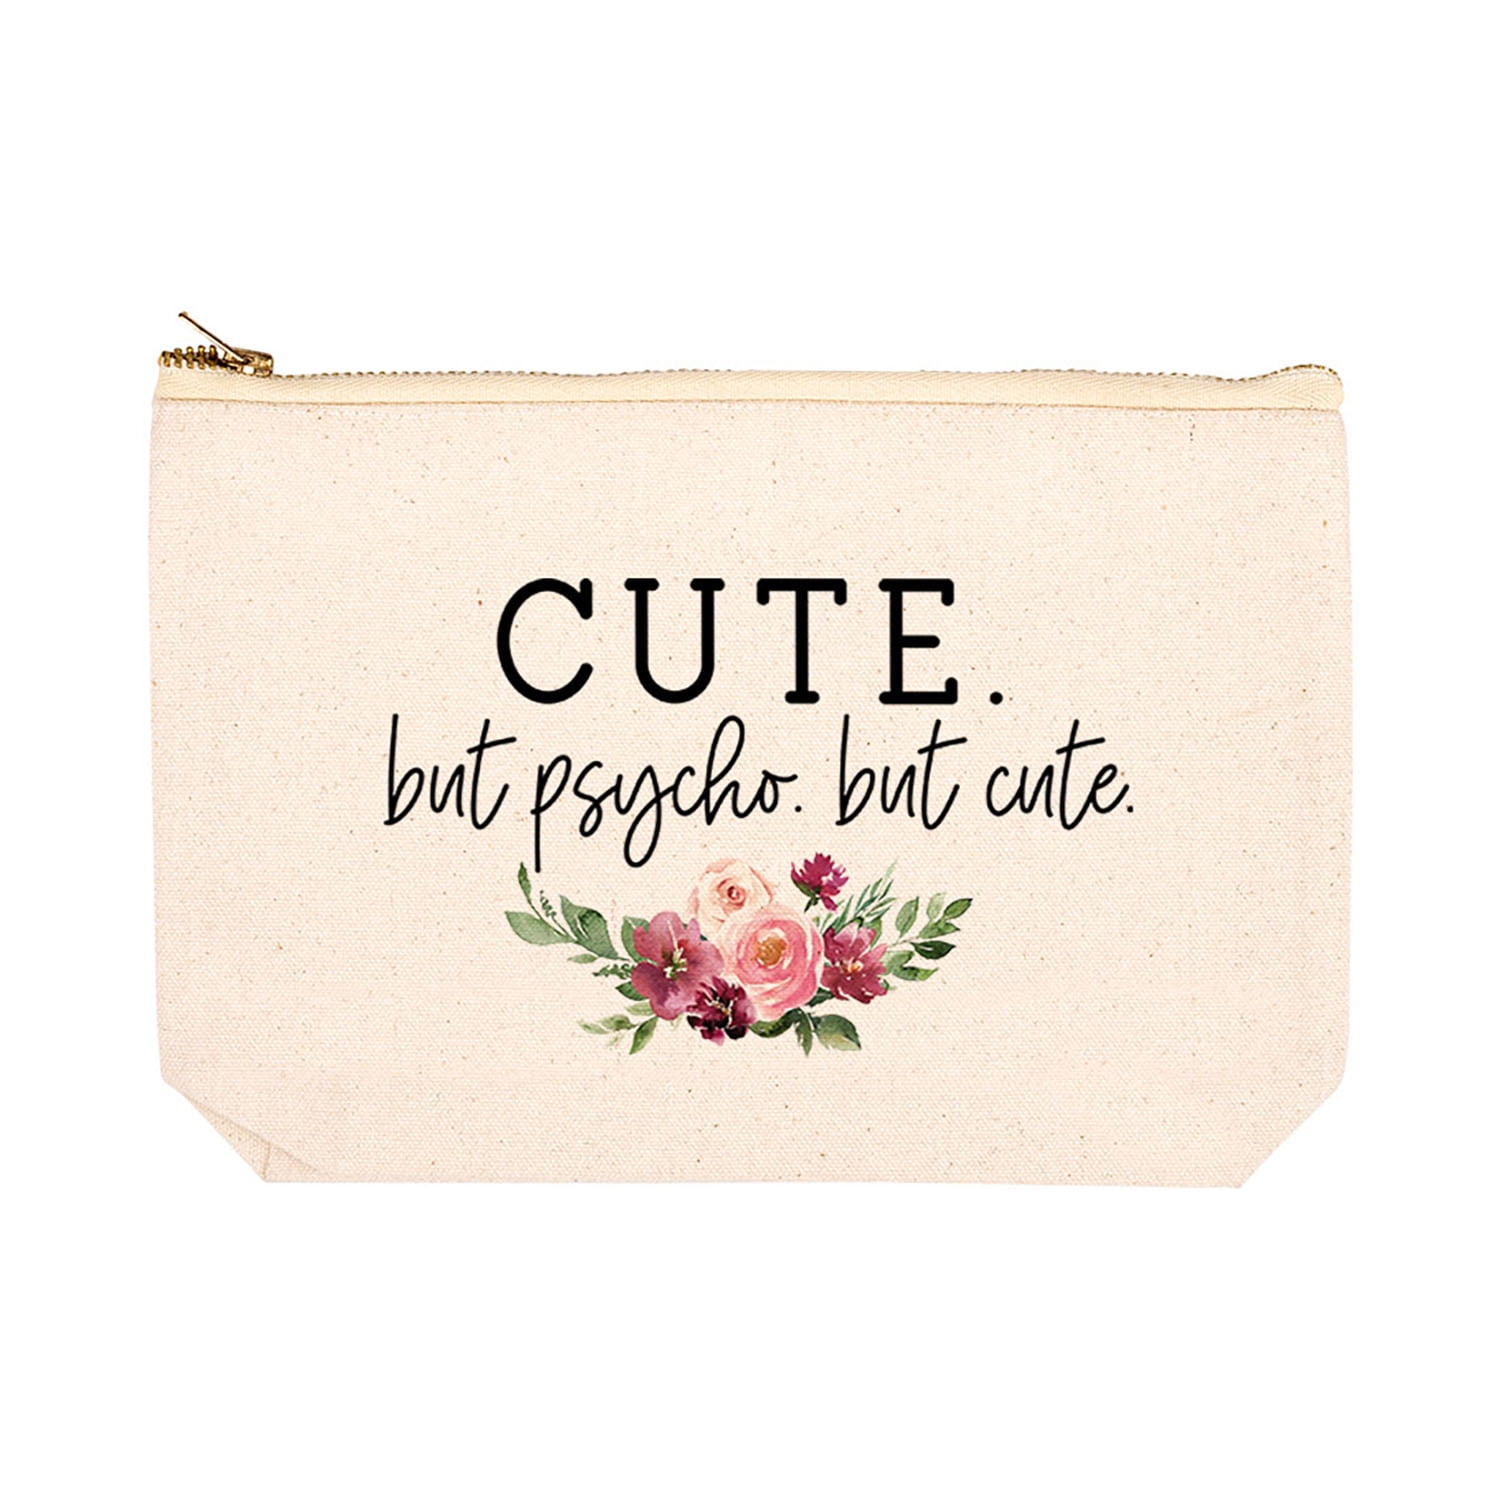 2 Glitter Makeup bags With Cute Sayings By Ellie Blue And Silver  eBay